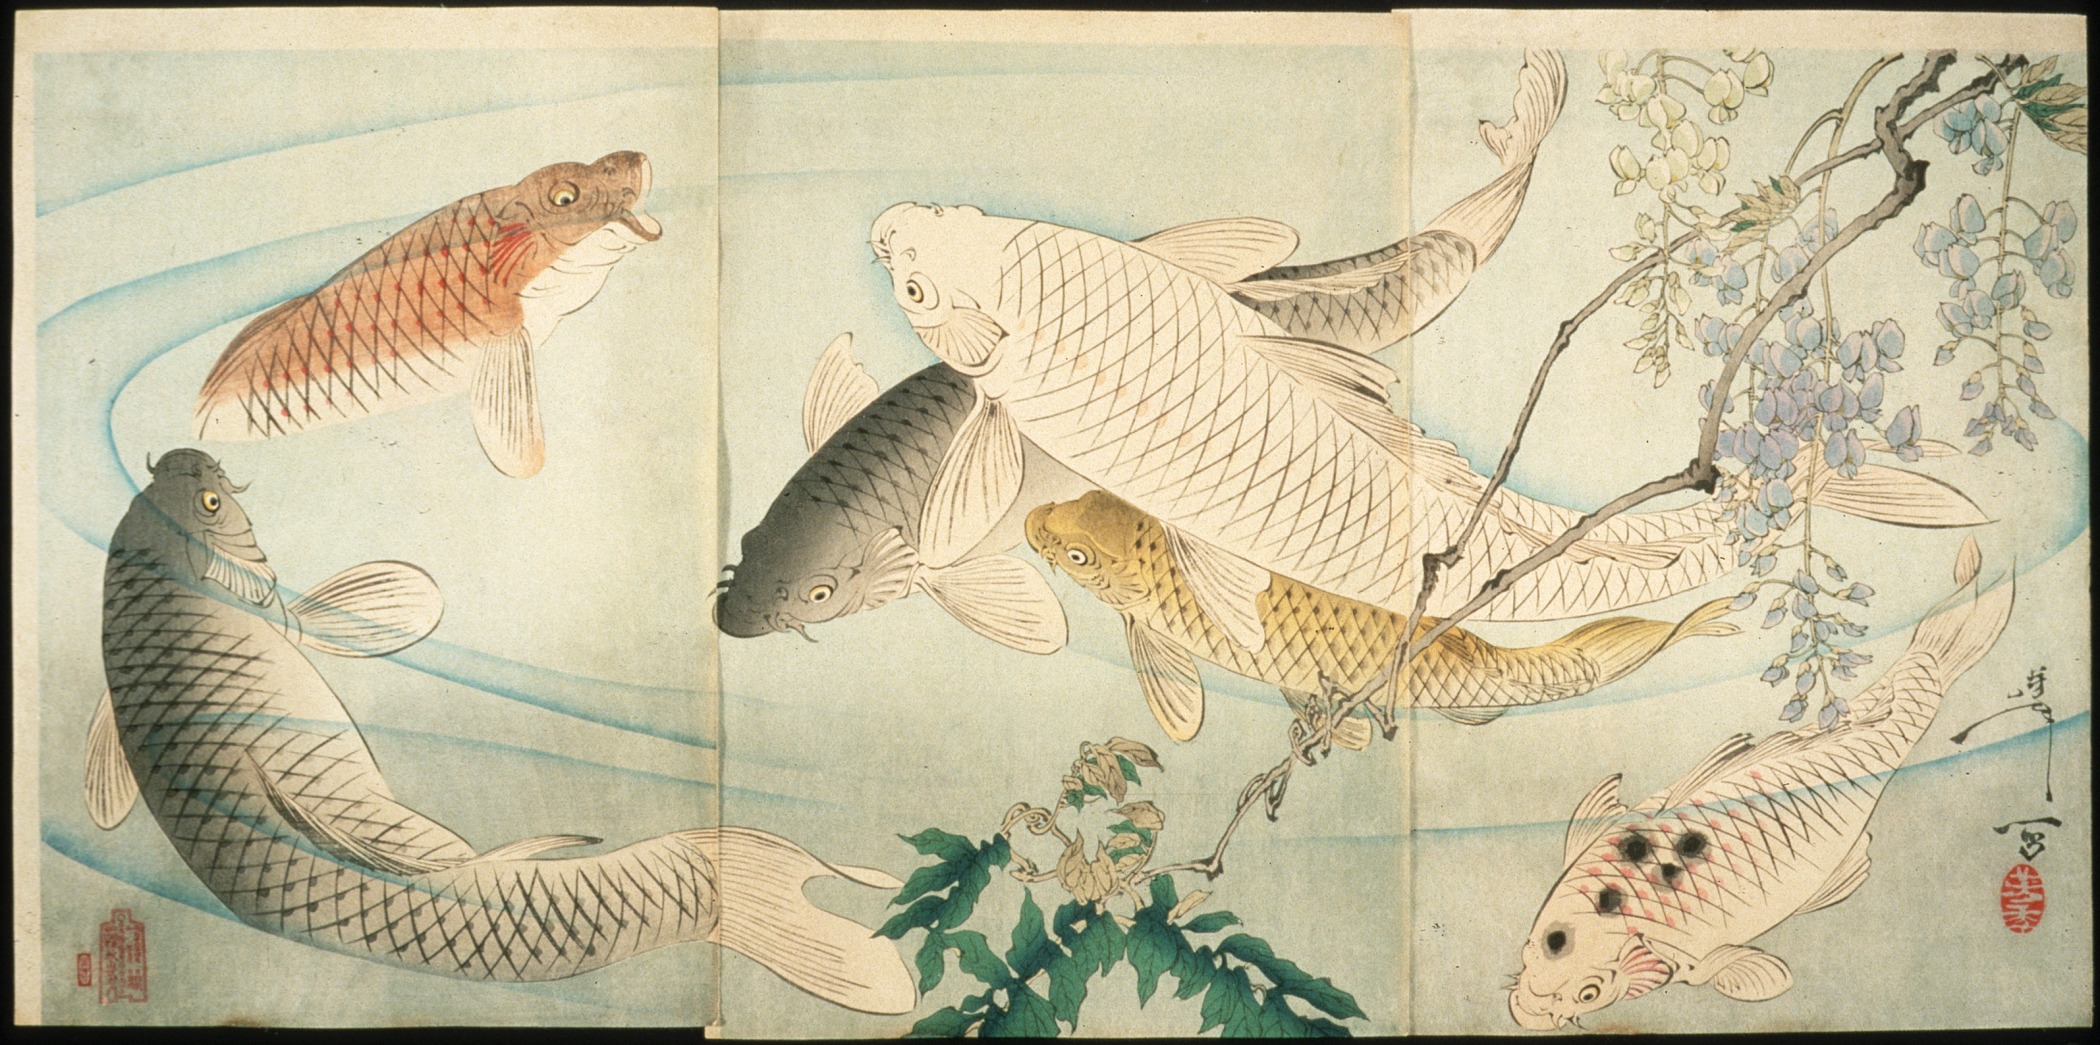 Several carp fish swimming in a pond below wisteria branches